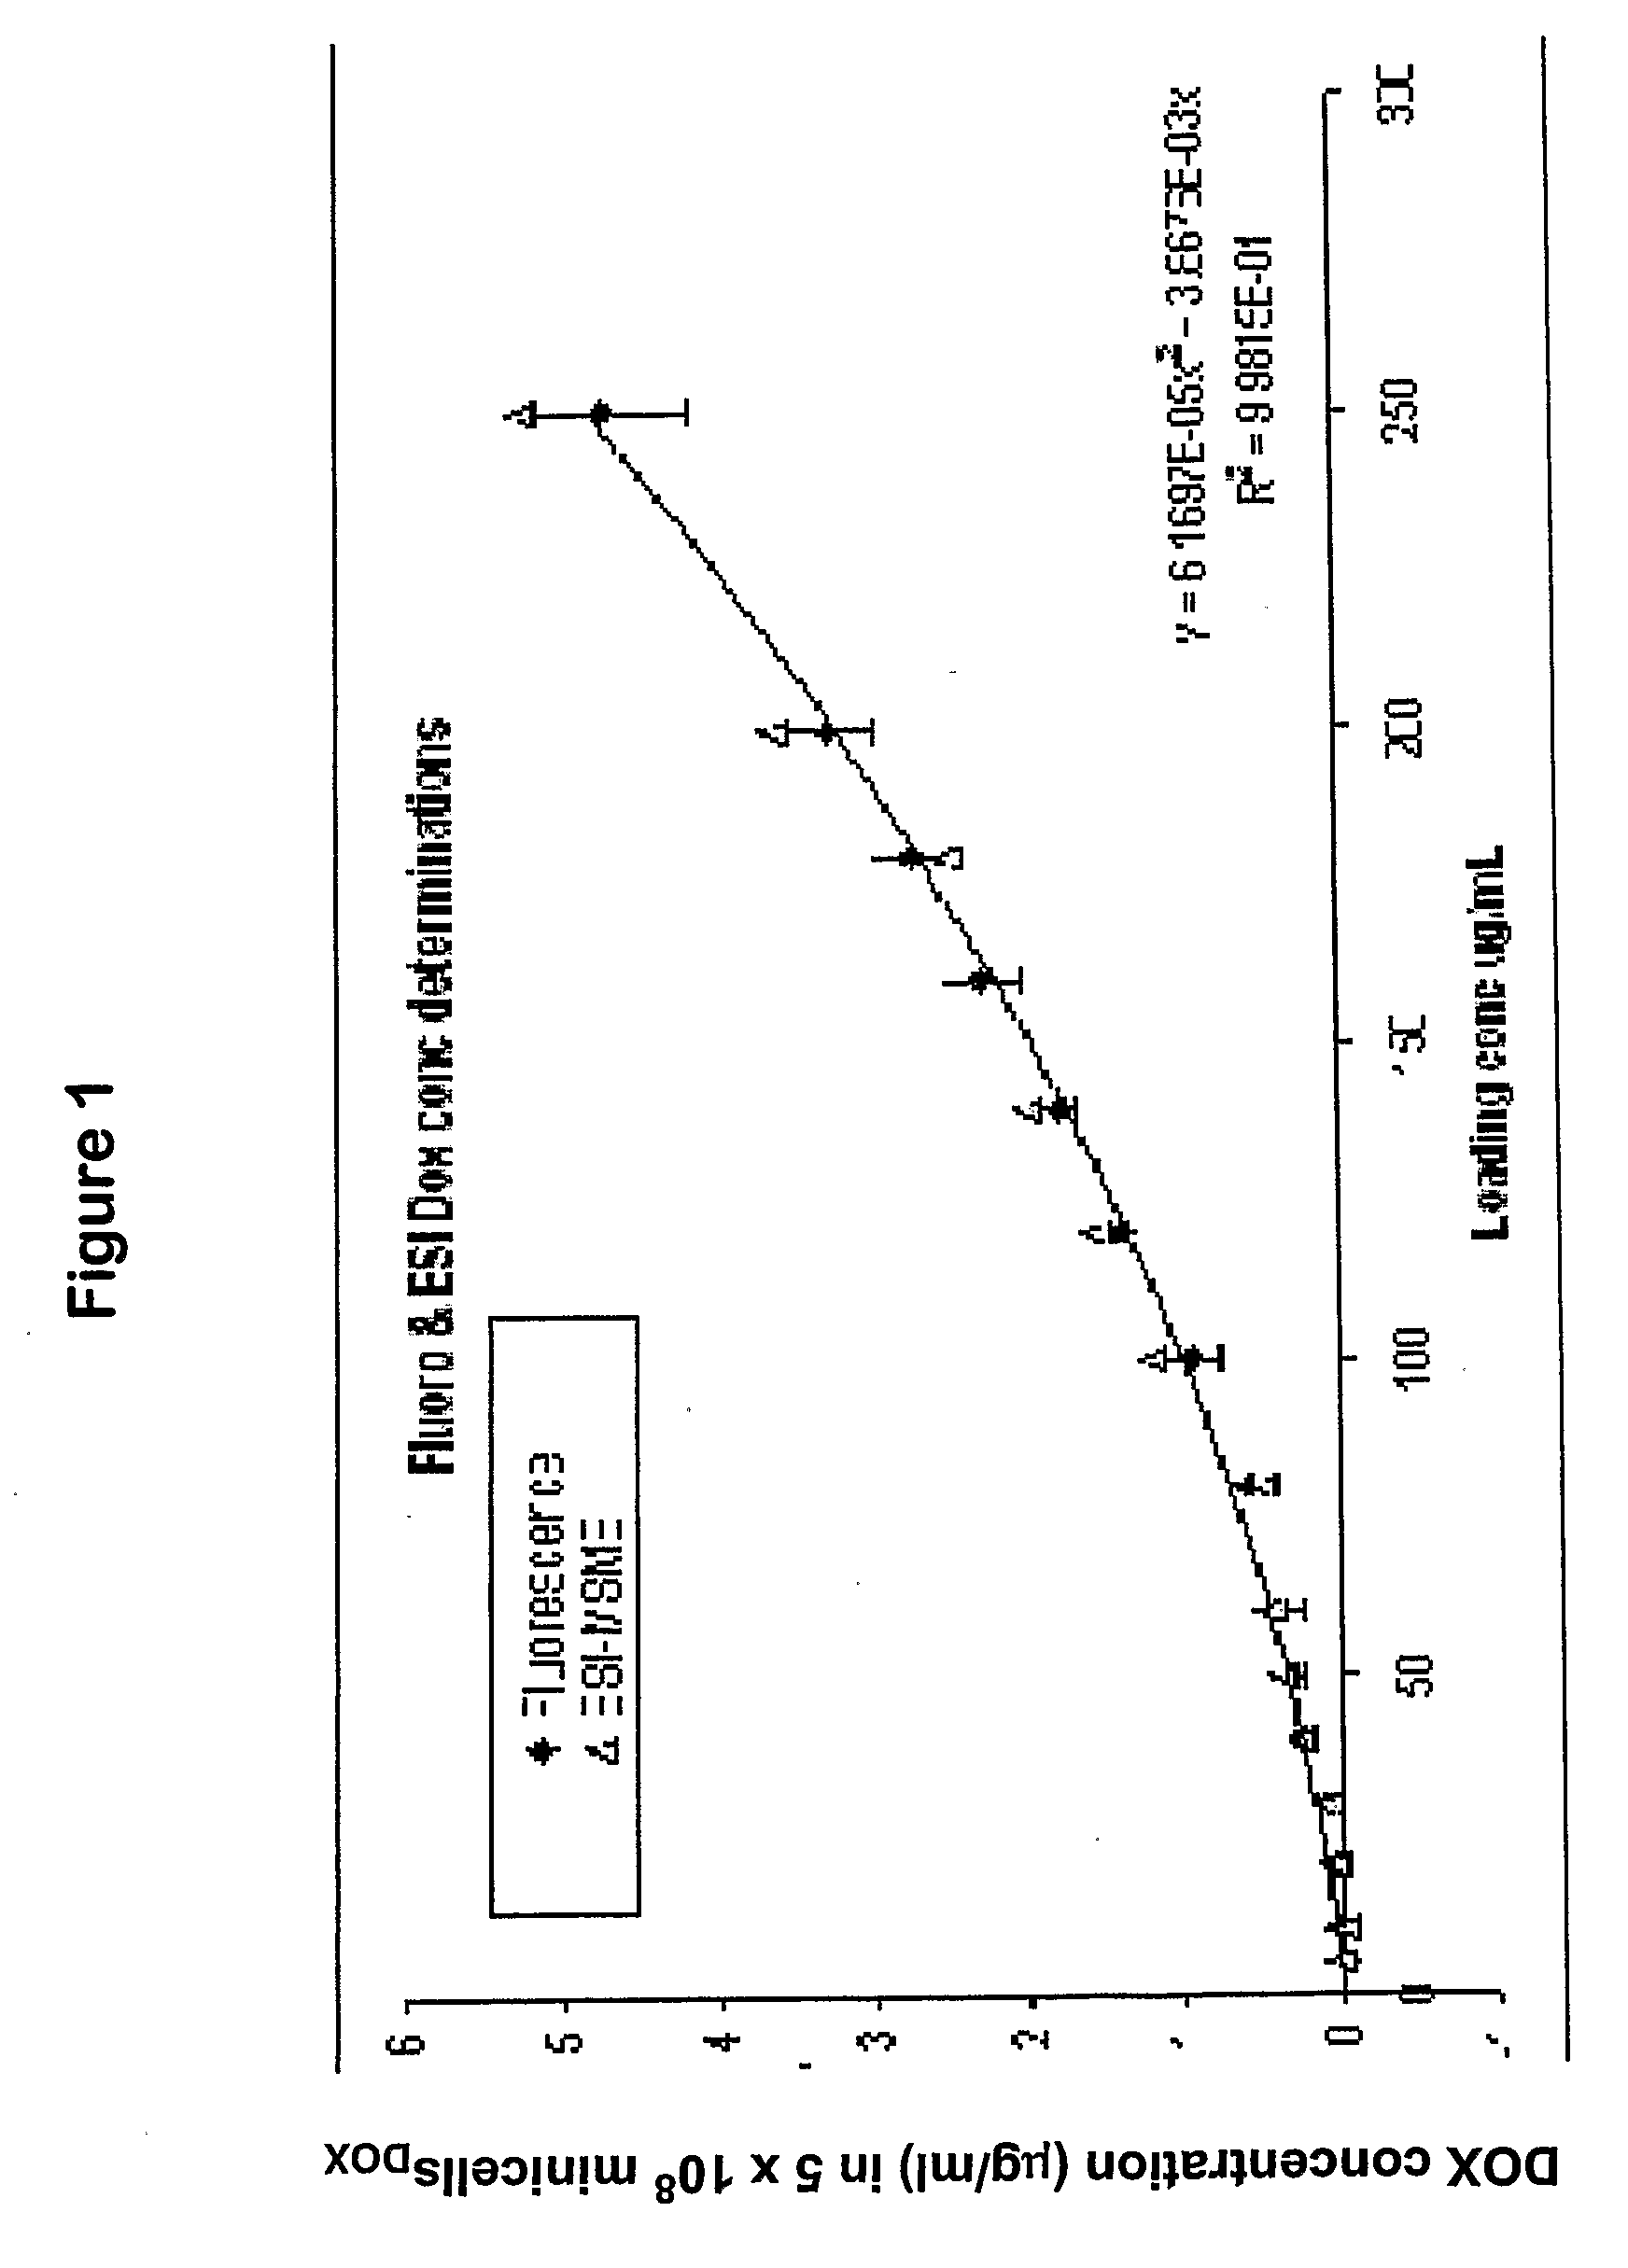 Compositions and Methods for Targeted in Vitro and in Vivo Drug Delivery to 
Mammalian Cells Via Bacterially Derived Intact Minicells